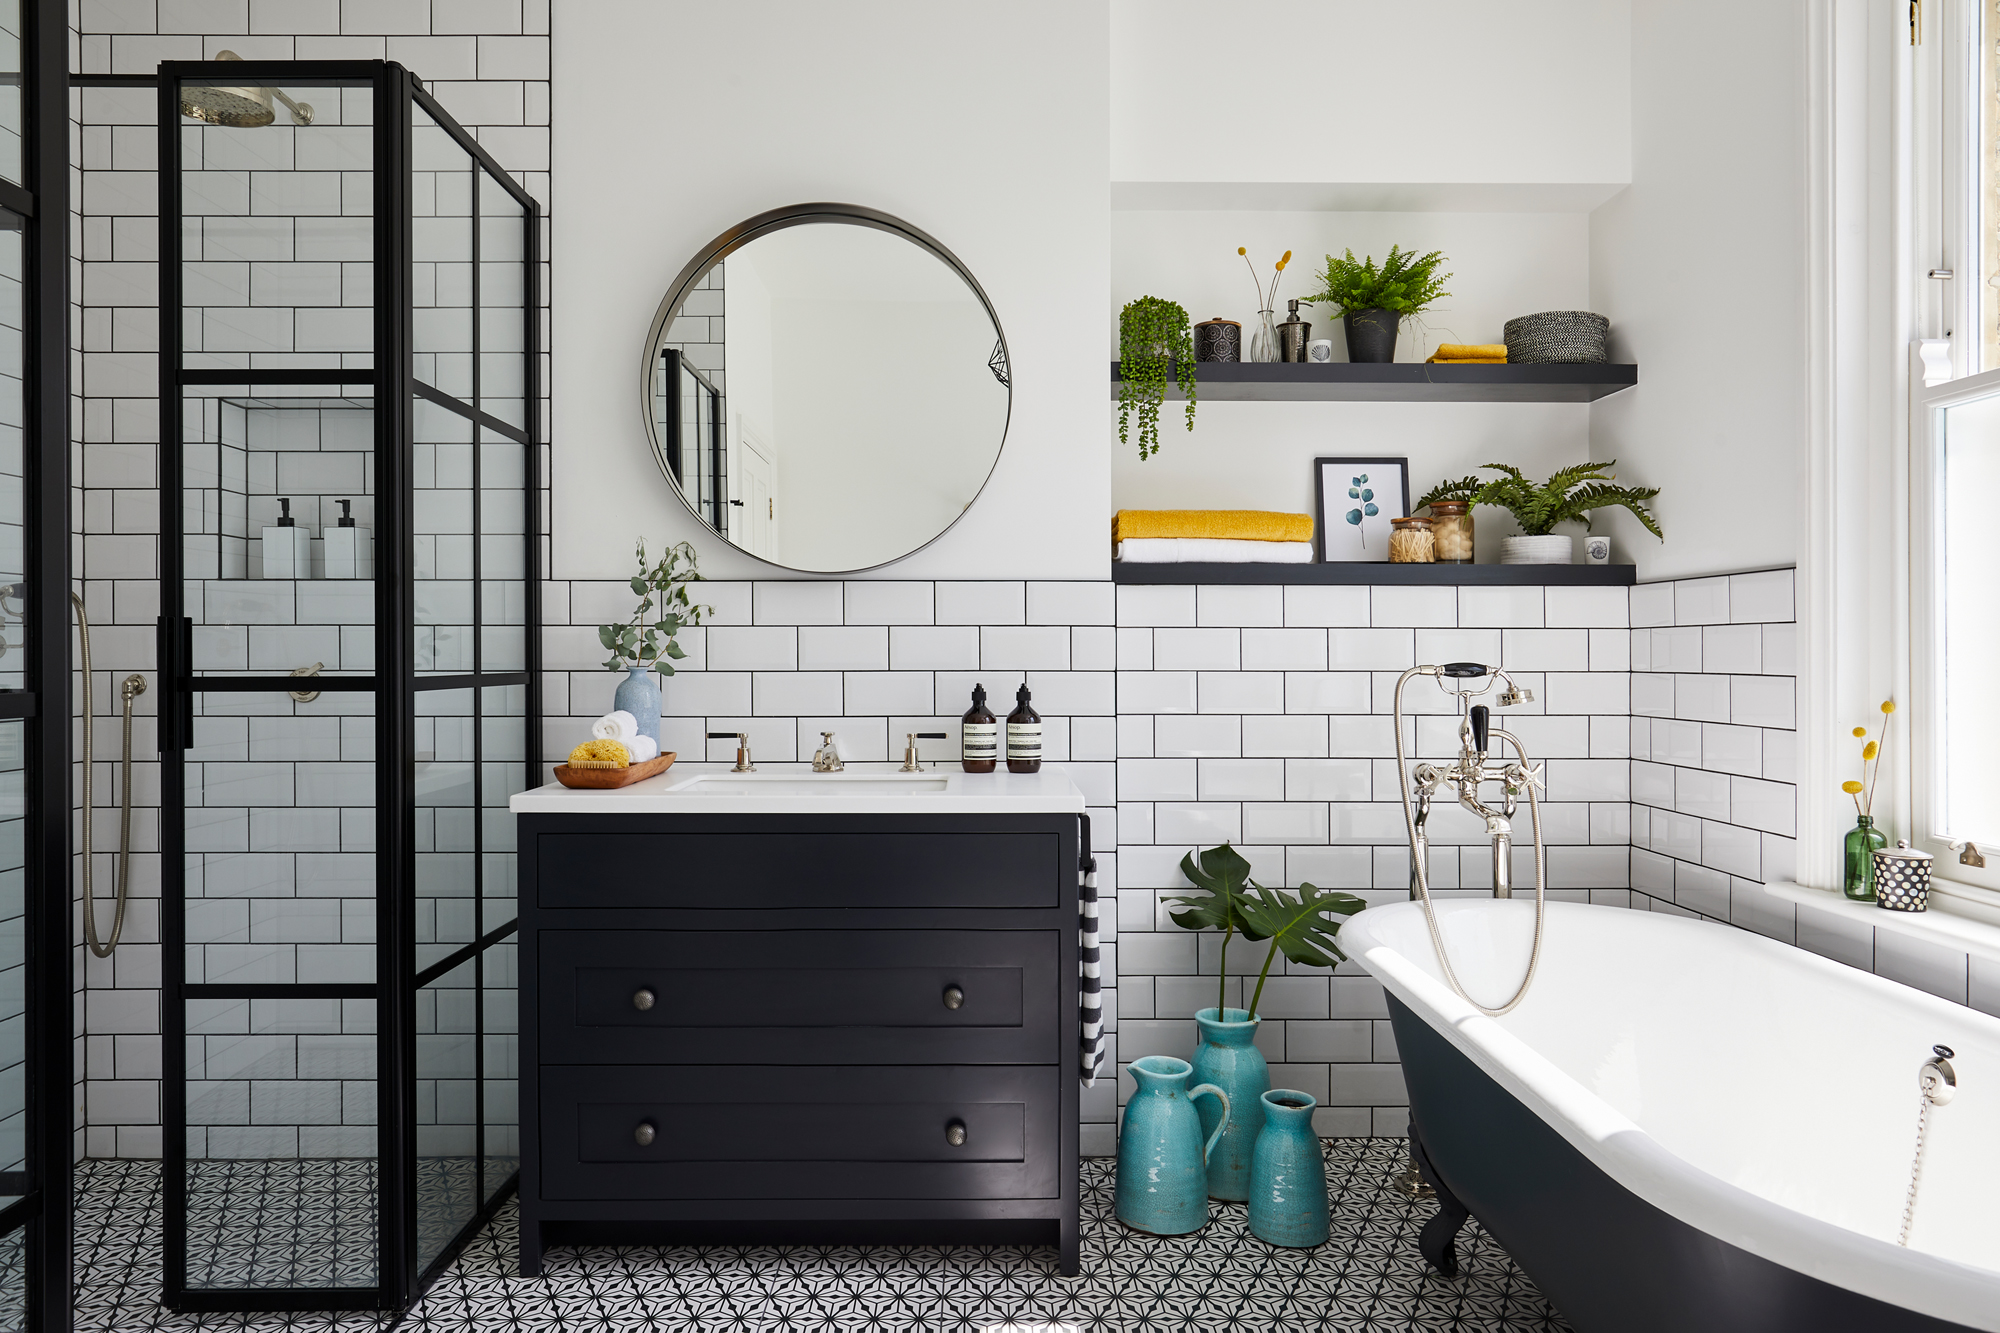 How to design a bathroom – expert bathroom planning and layout advice